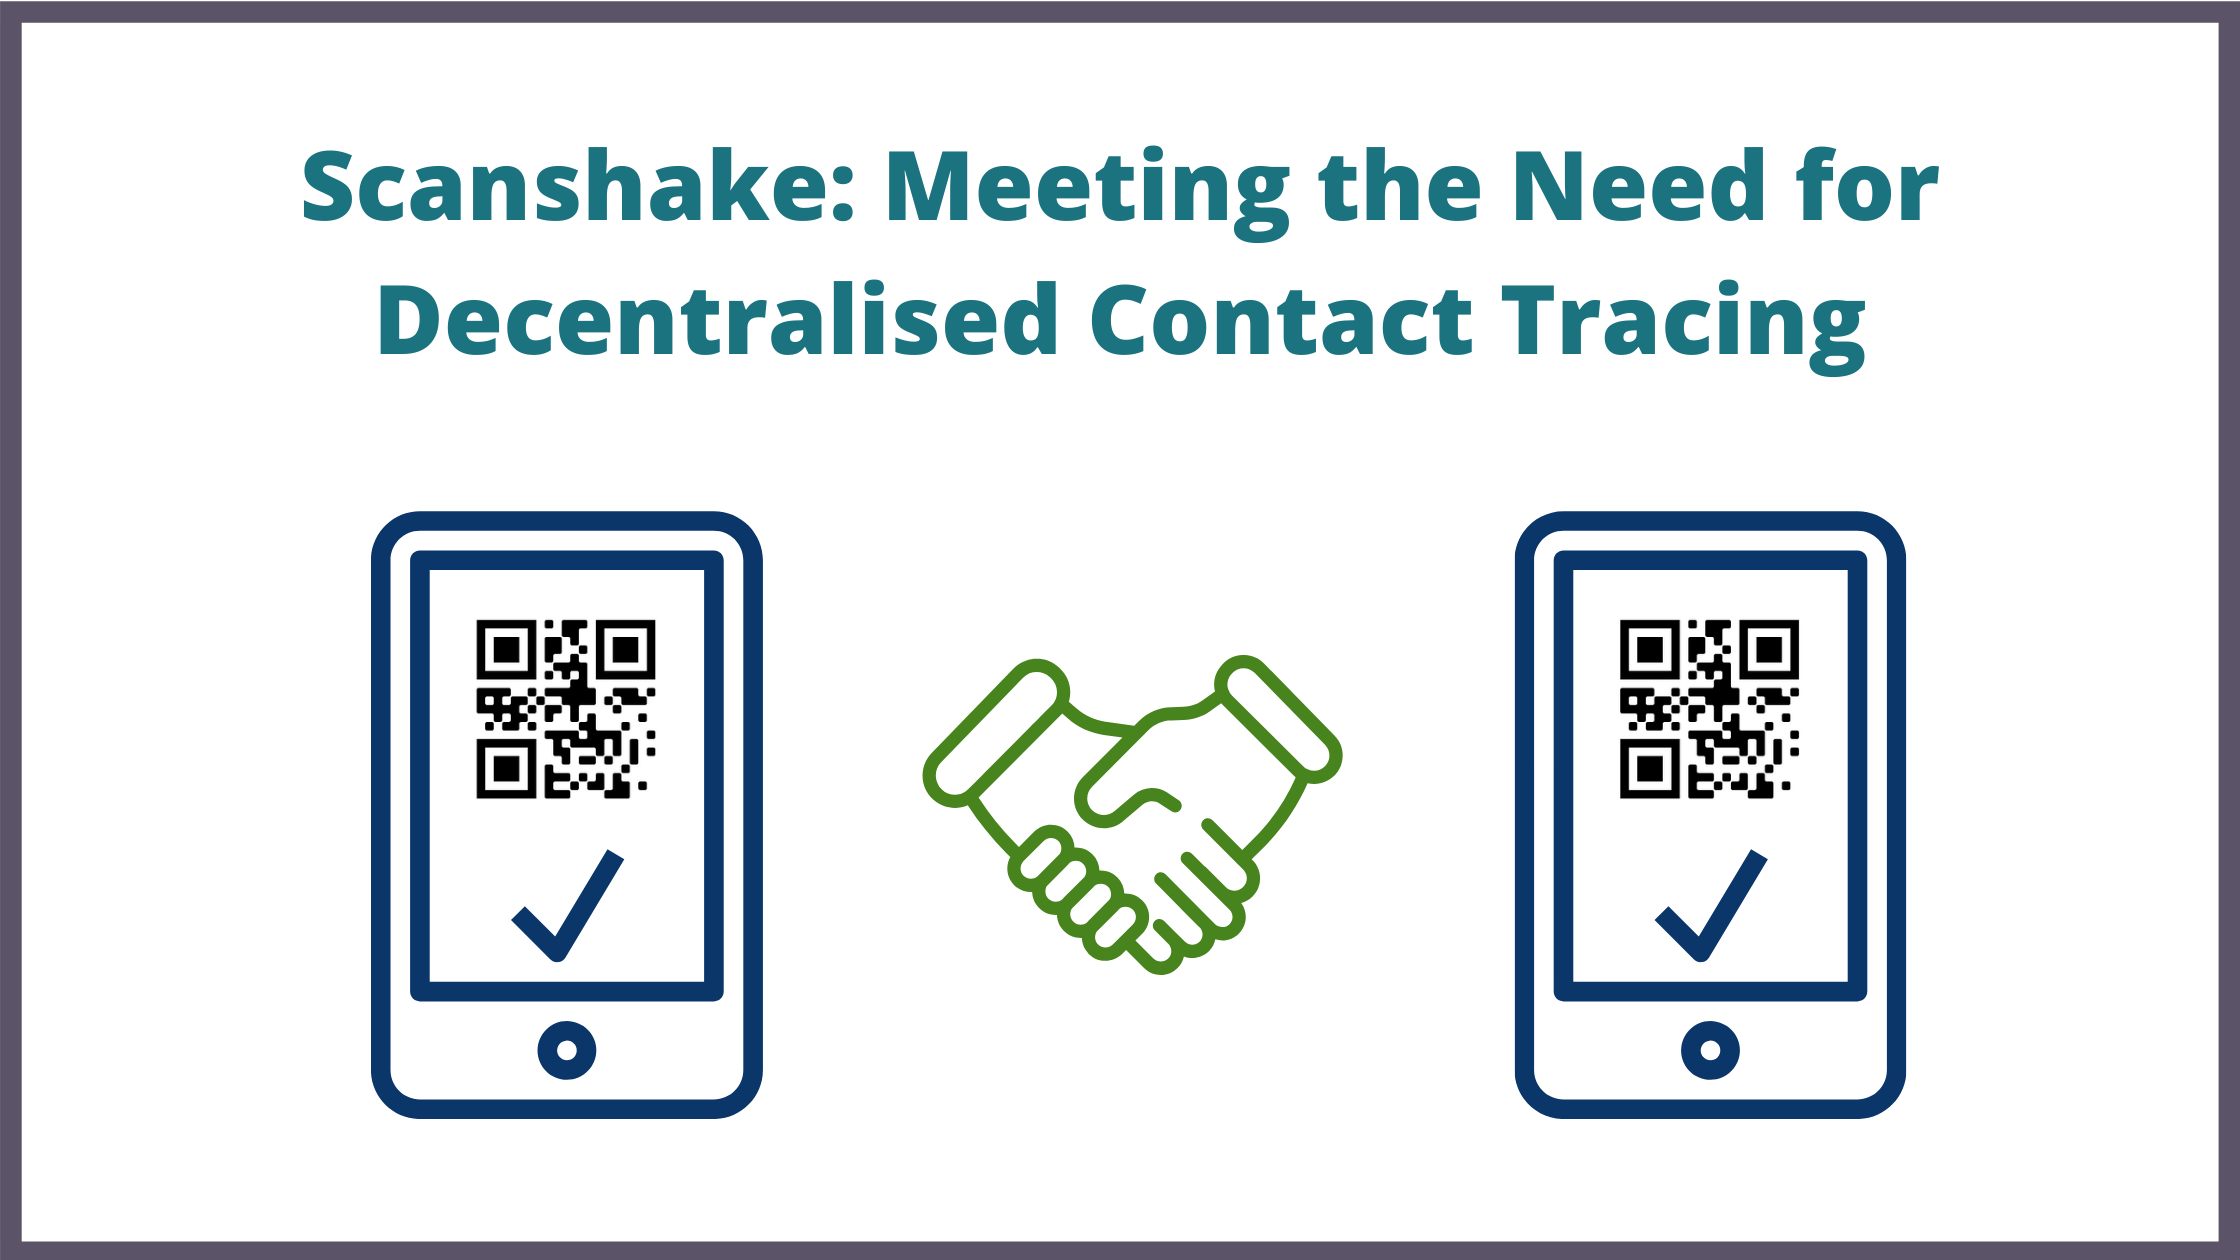 Scanshake: Meeting the Need for Decentralised Contact Tracing